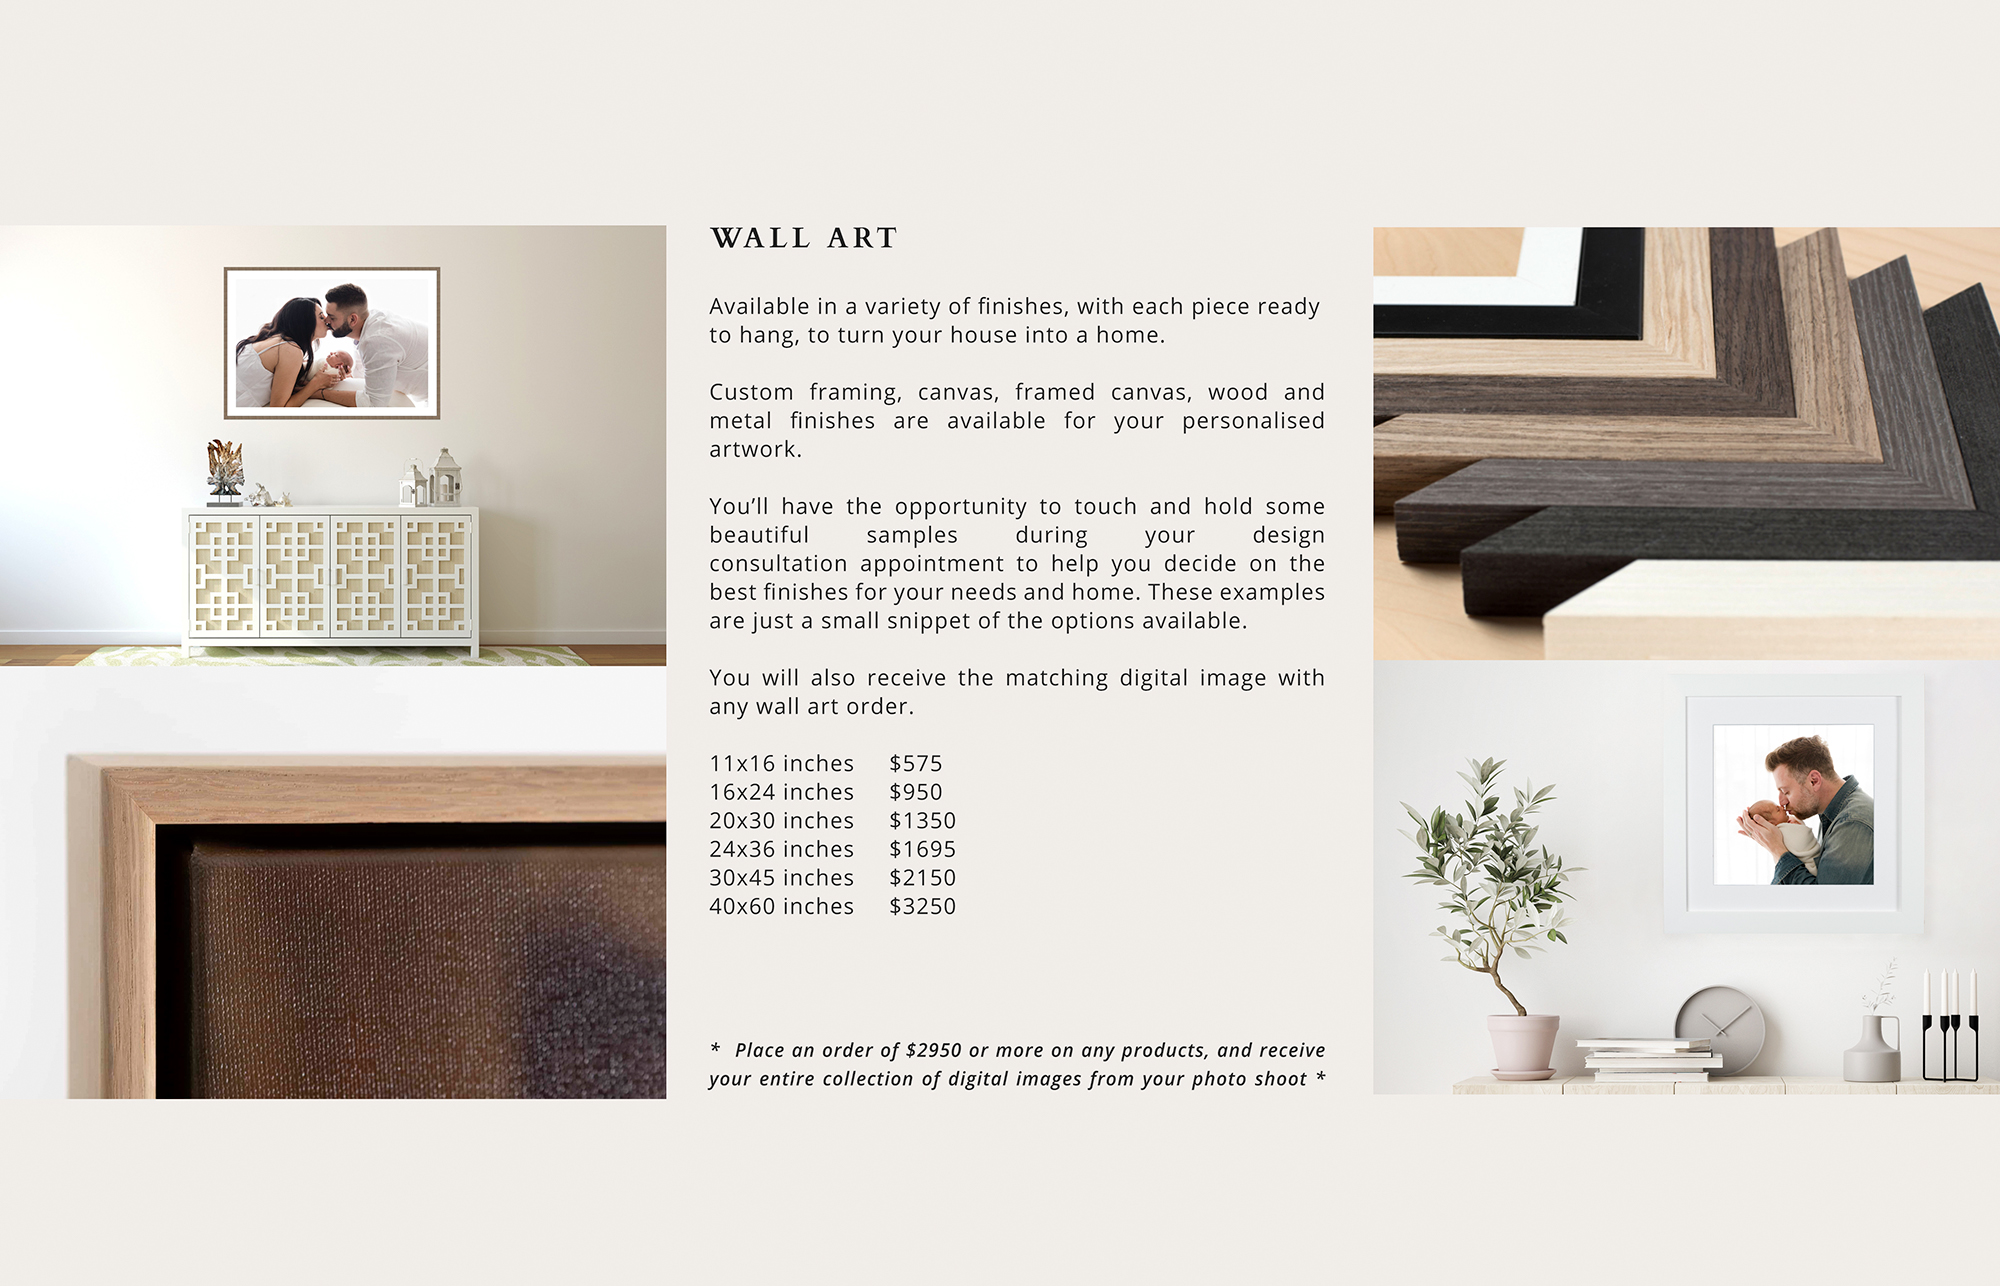 06 - WALL ART PRICING PAGE